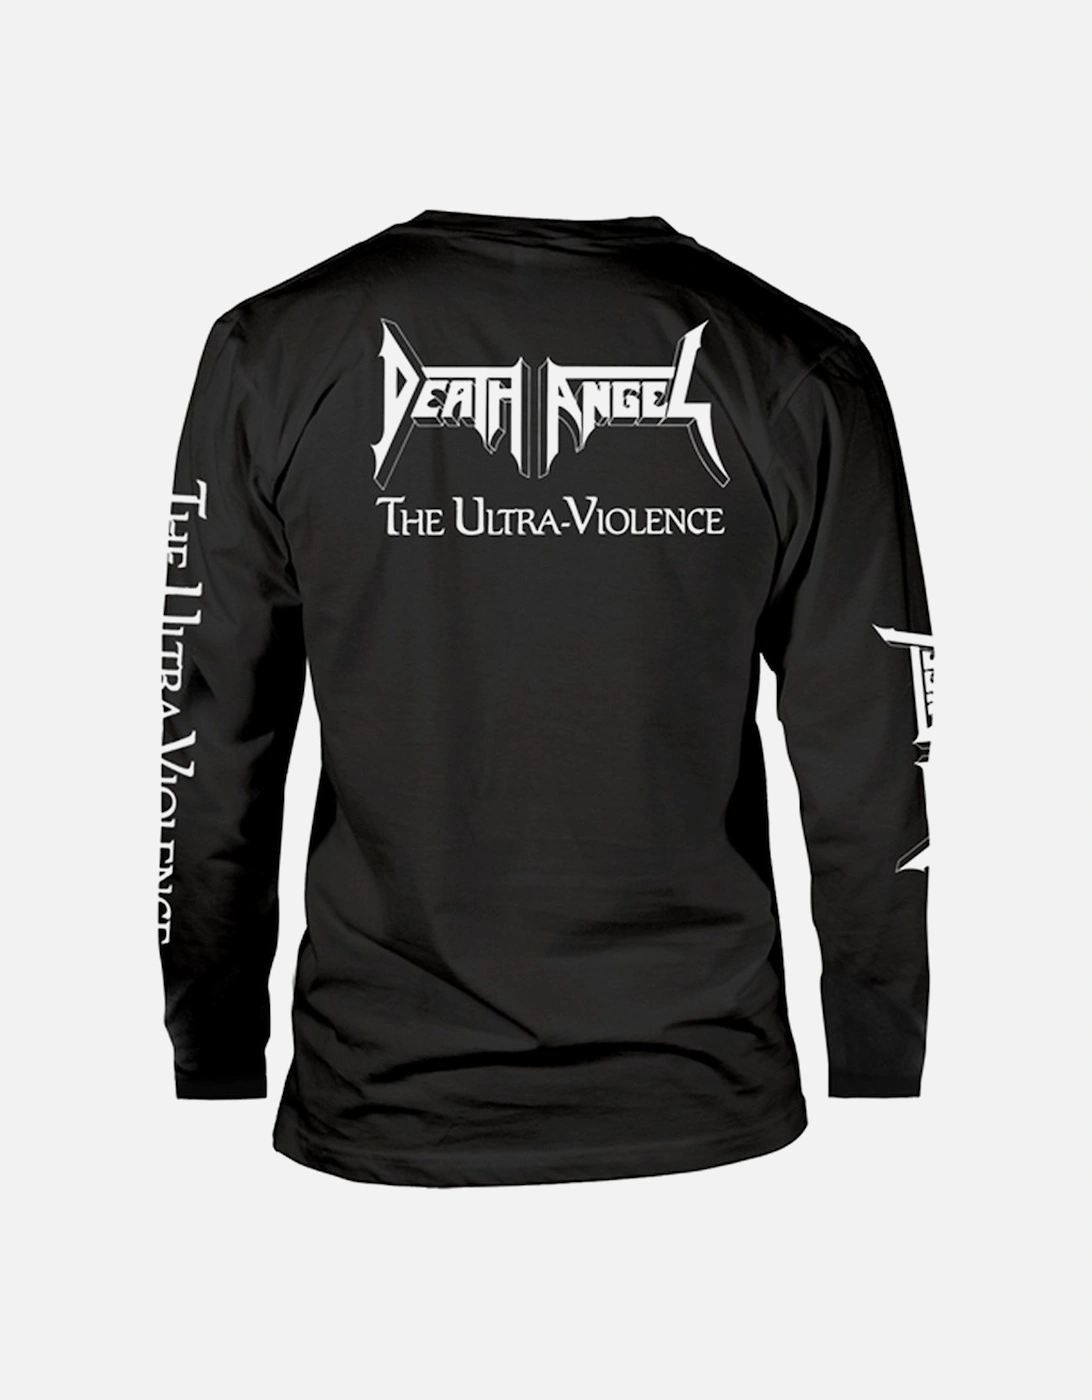 Unisex Adult The Ultra Violence Long-Sleeved T-Shirt